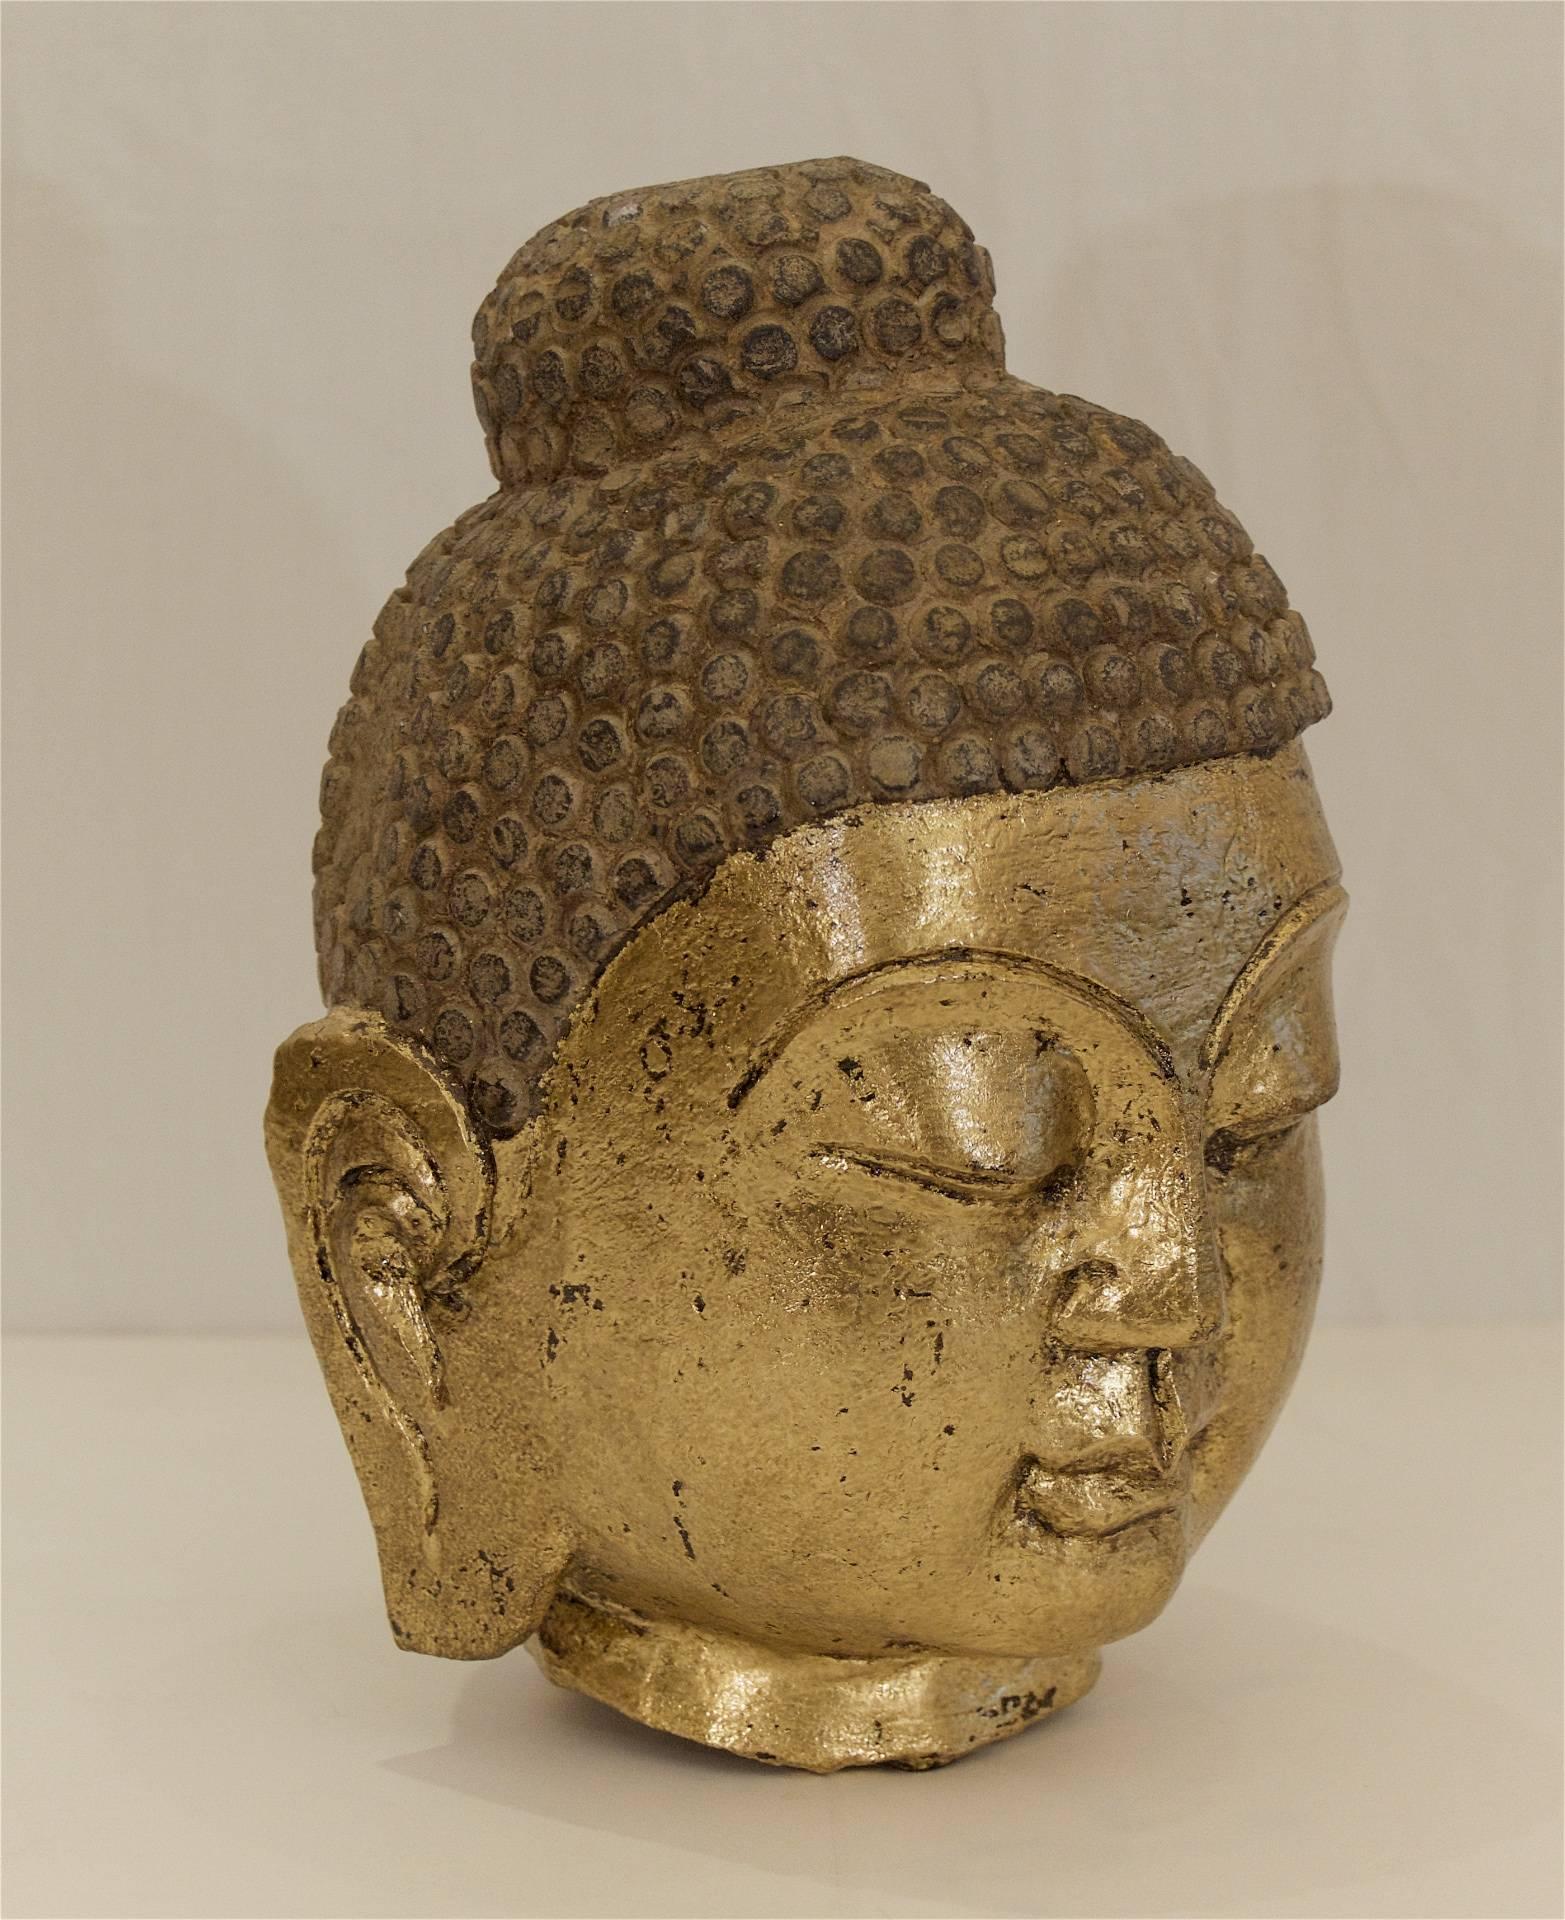 Excellent Buddha head of carved stone with recently gilt face.

Uncertain age of creation, no later than early 20th century.